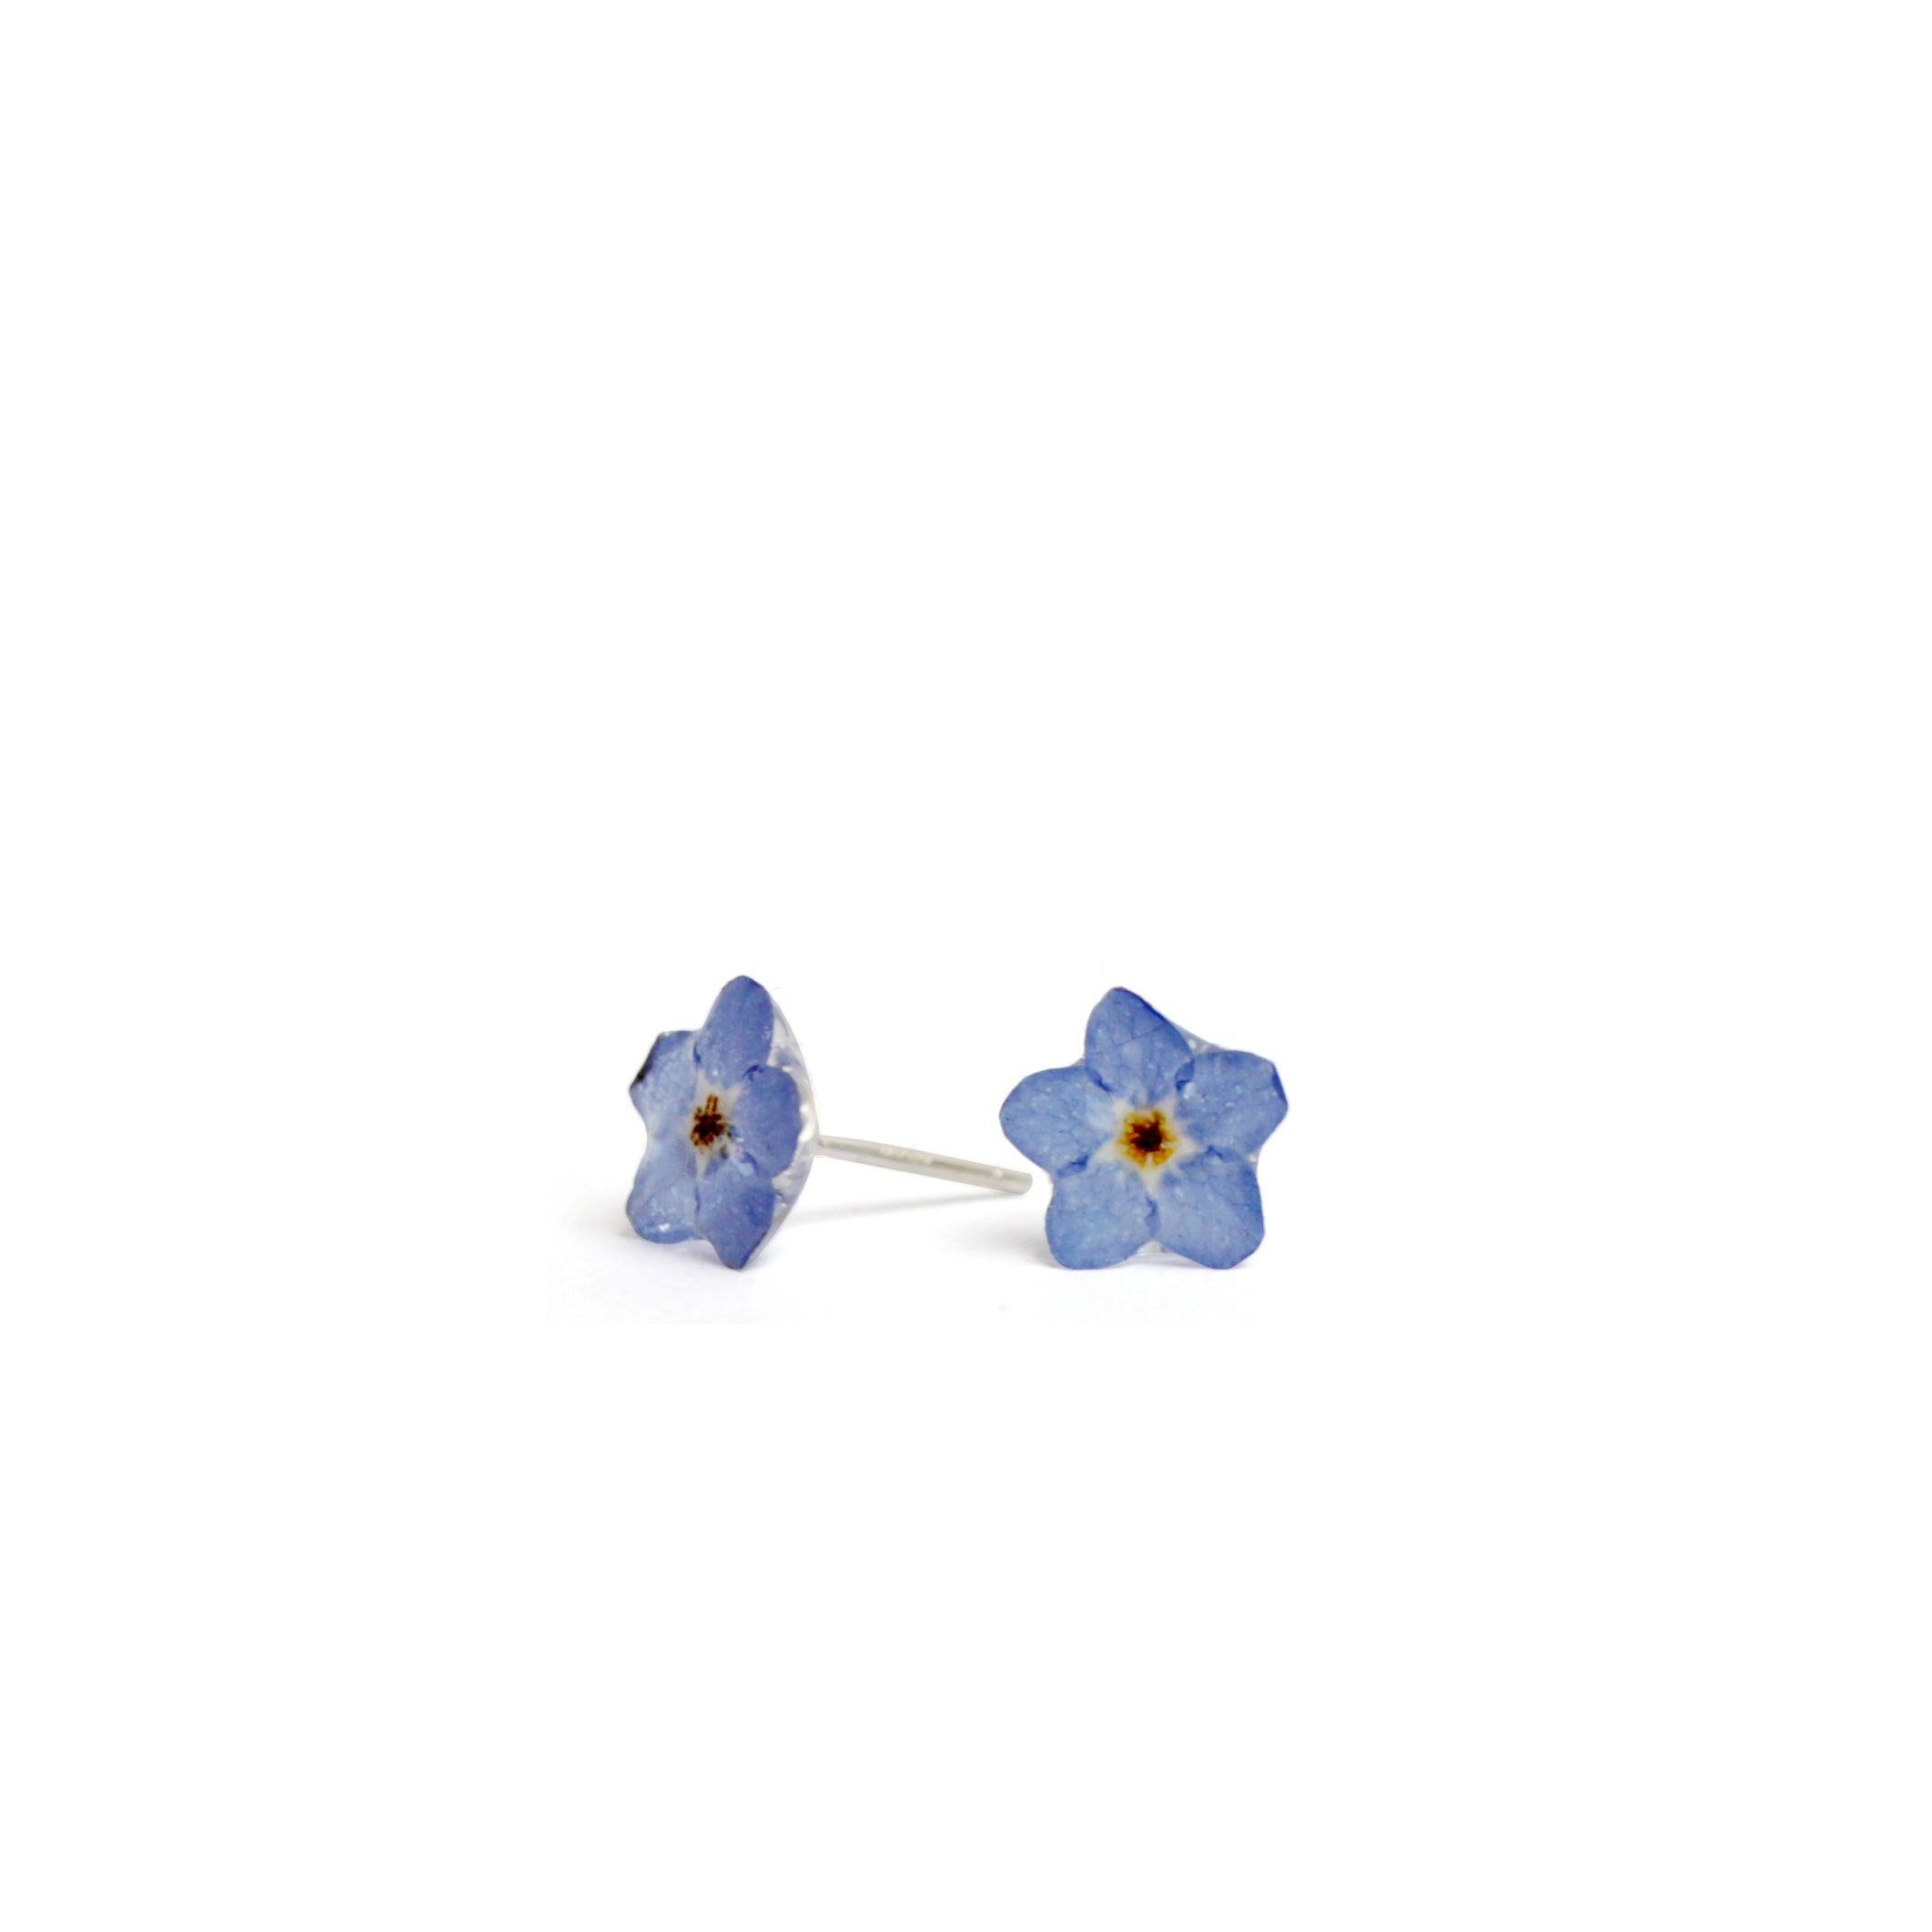 Forget Me Not – NordicFlowers